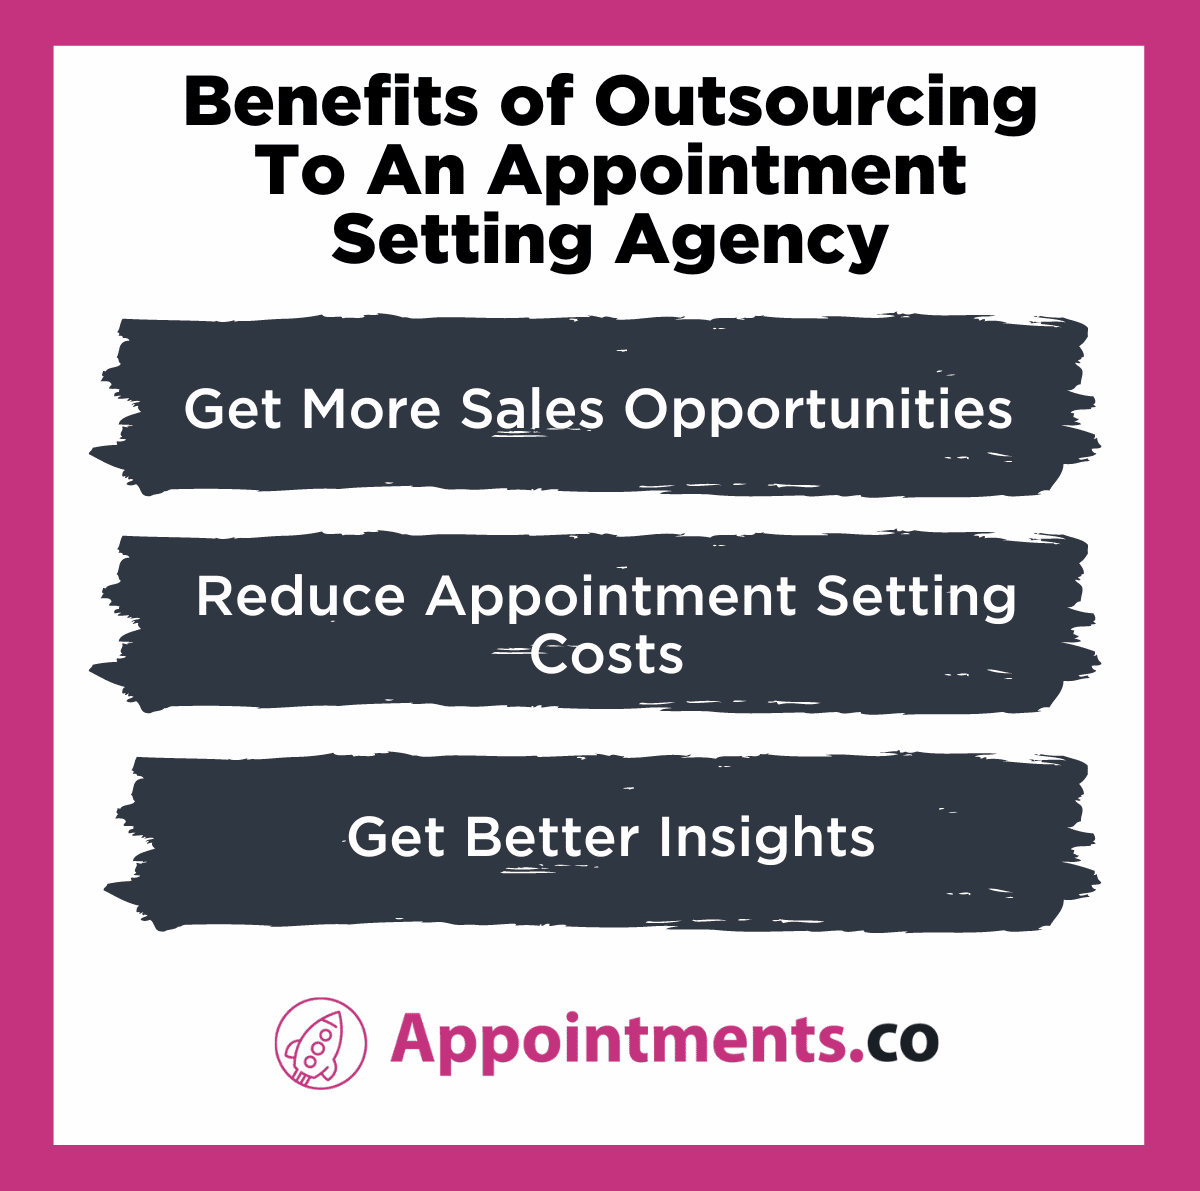 Benefits of Outsourcing To An Appointment Setting Service